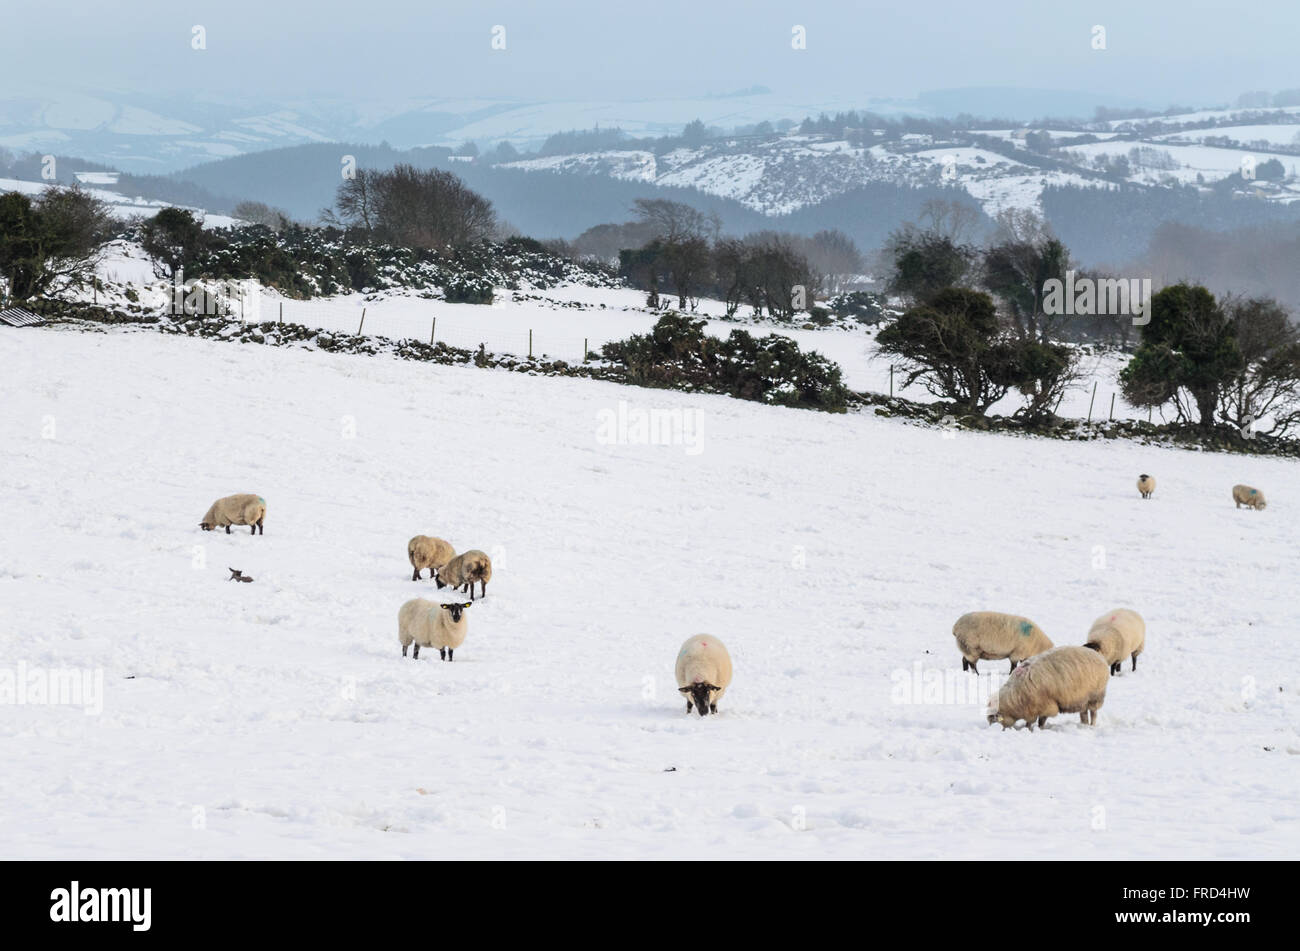 Sheep in the snowy mountains of Ireland with mountains and trees in the background Stock Photo